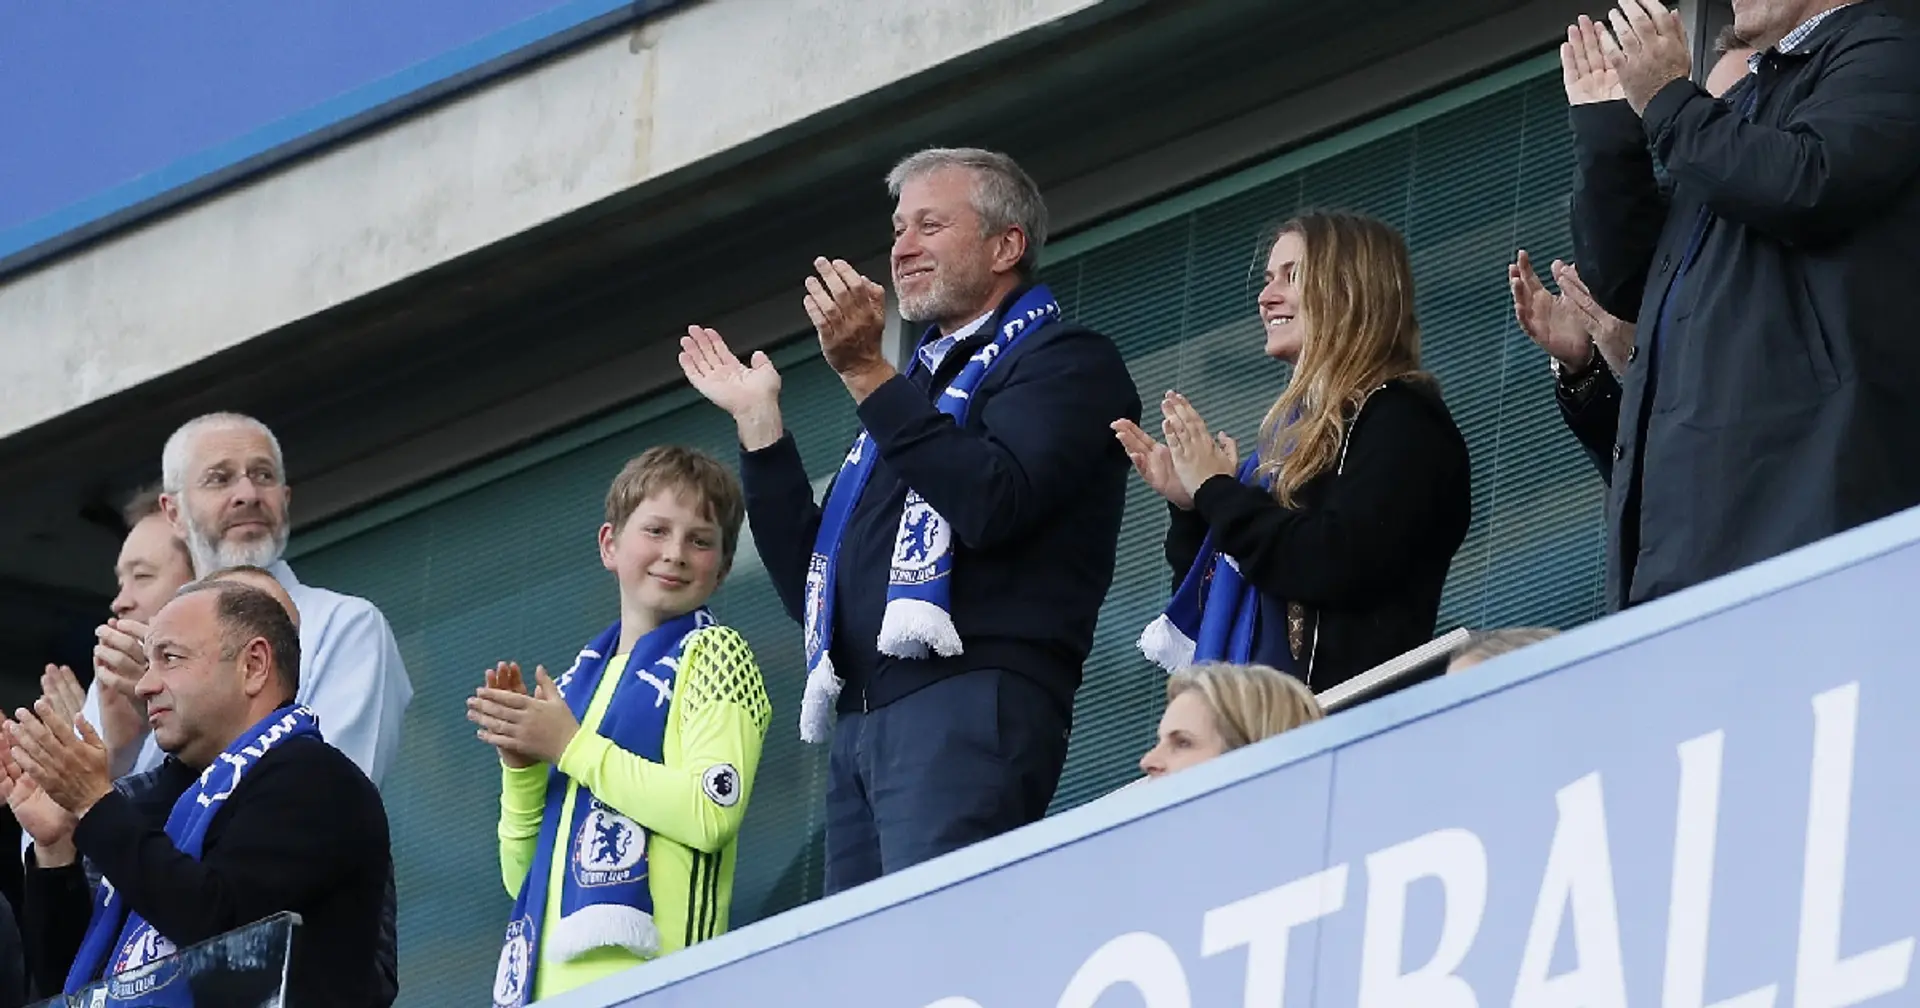 Roman Abramovich set for 1,000th game as Chelsea owner: Looking at who tops most apps, goals and clean sheets stats in this time